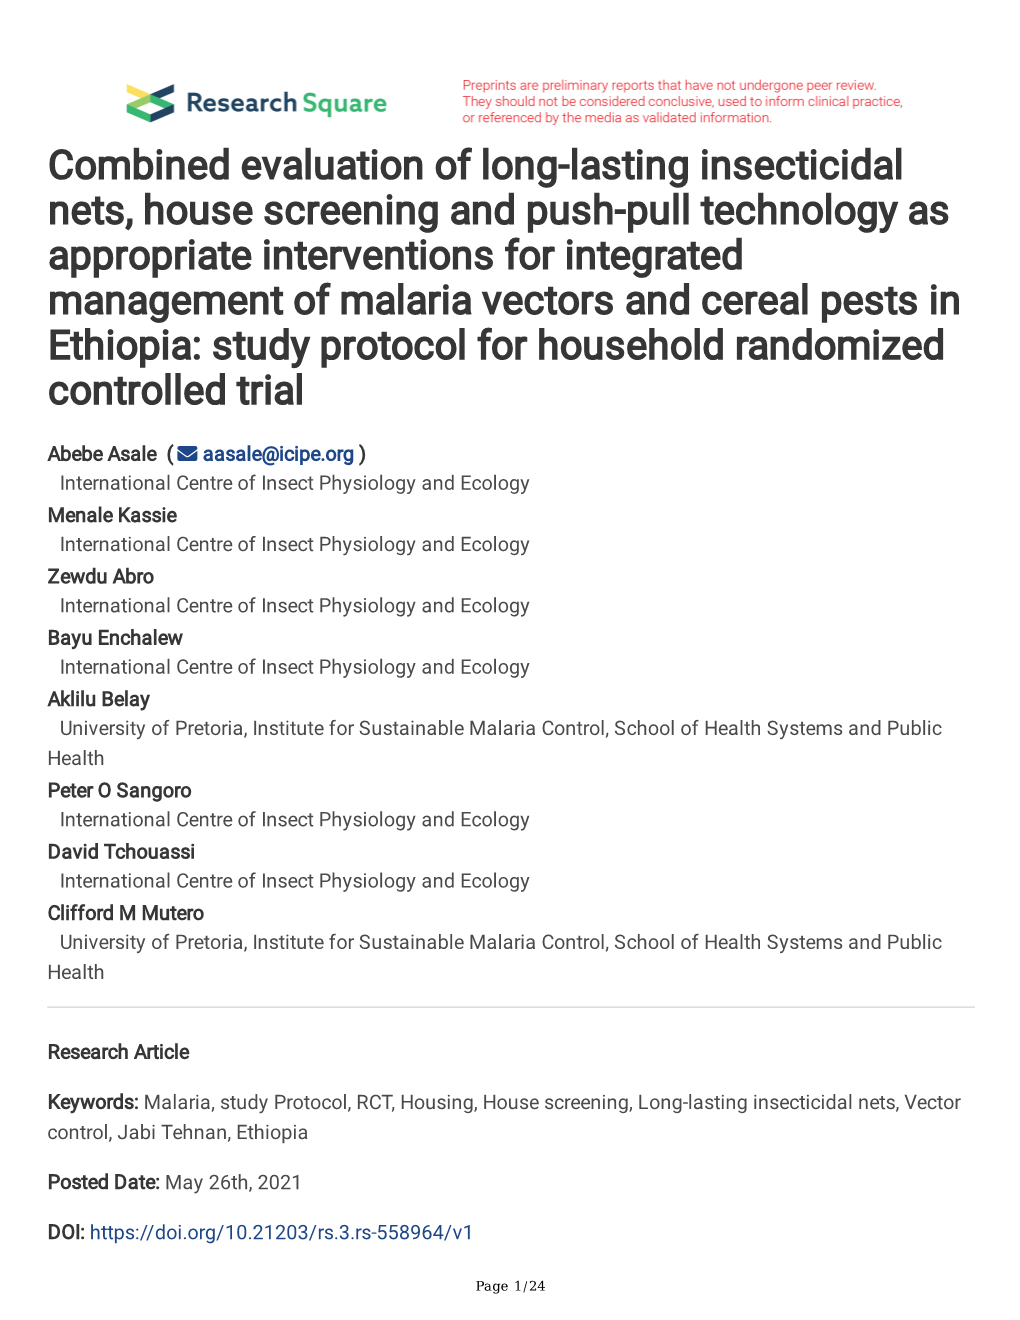 Combined Evaluation of Long-Lasting Insecticidal Nets, House Screening